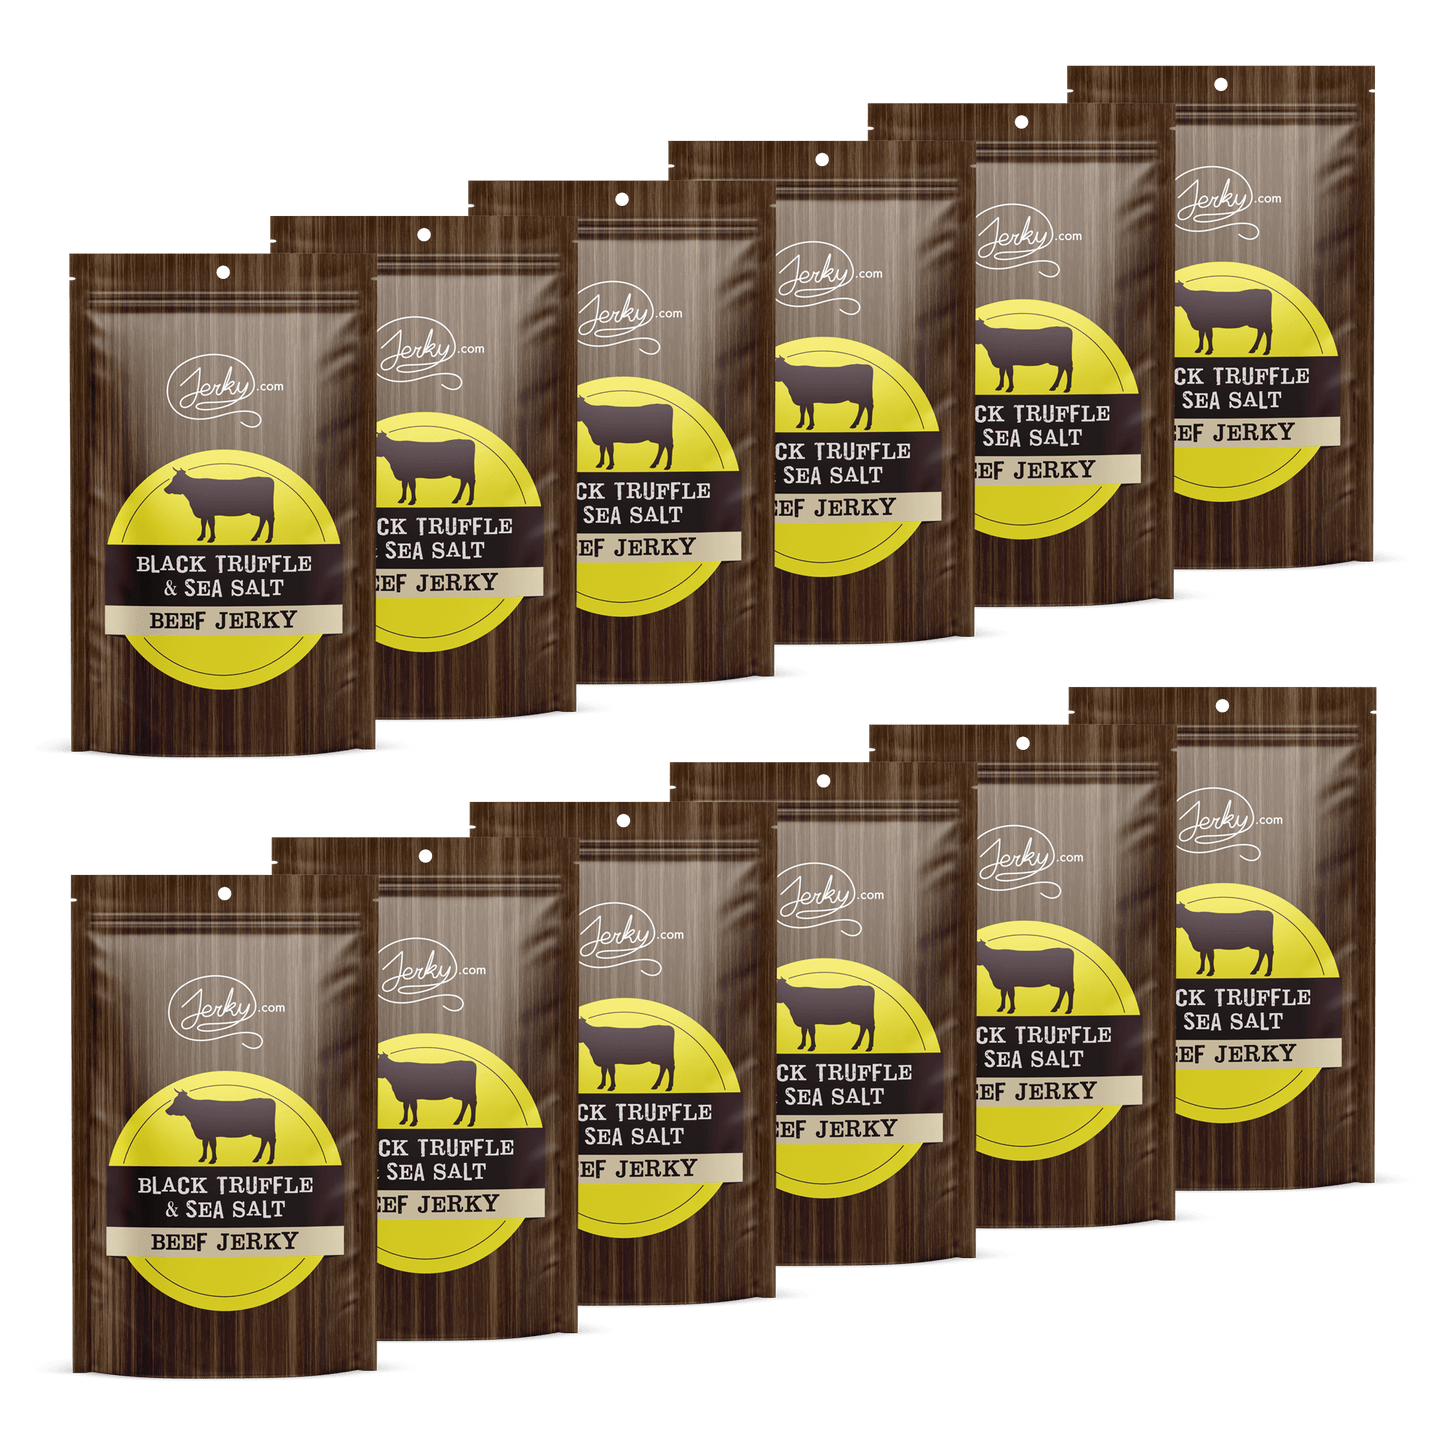 All-Natural Beef Jerky - Black Truffle and Sea Salt by Jerky.com